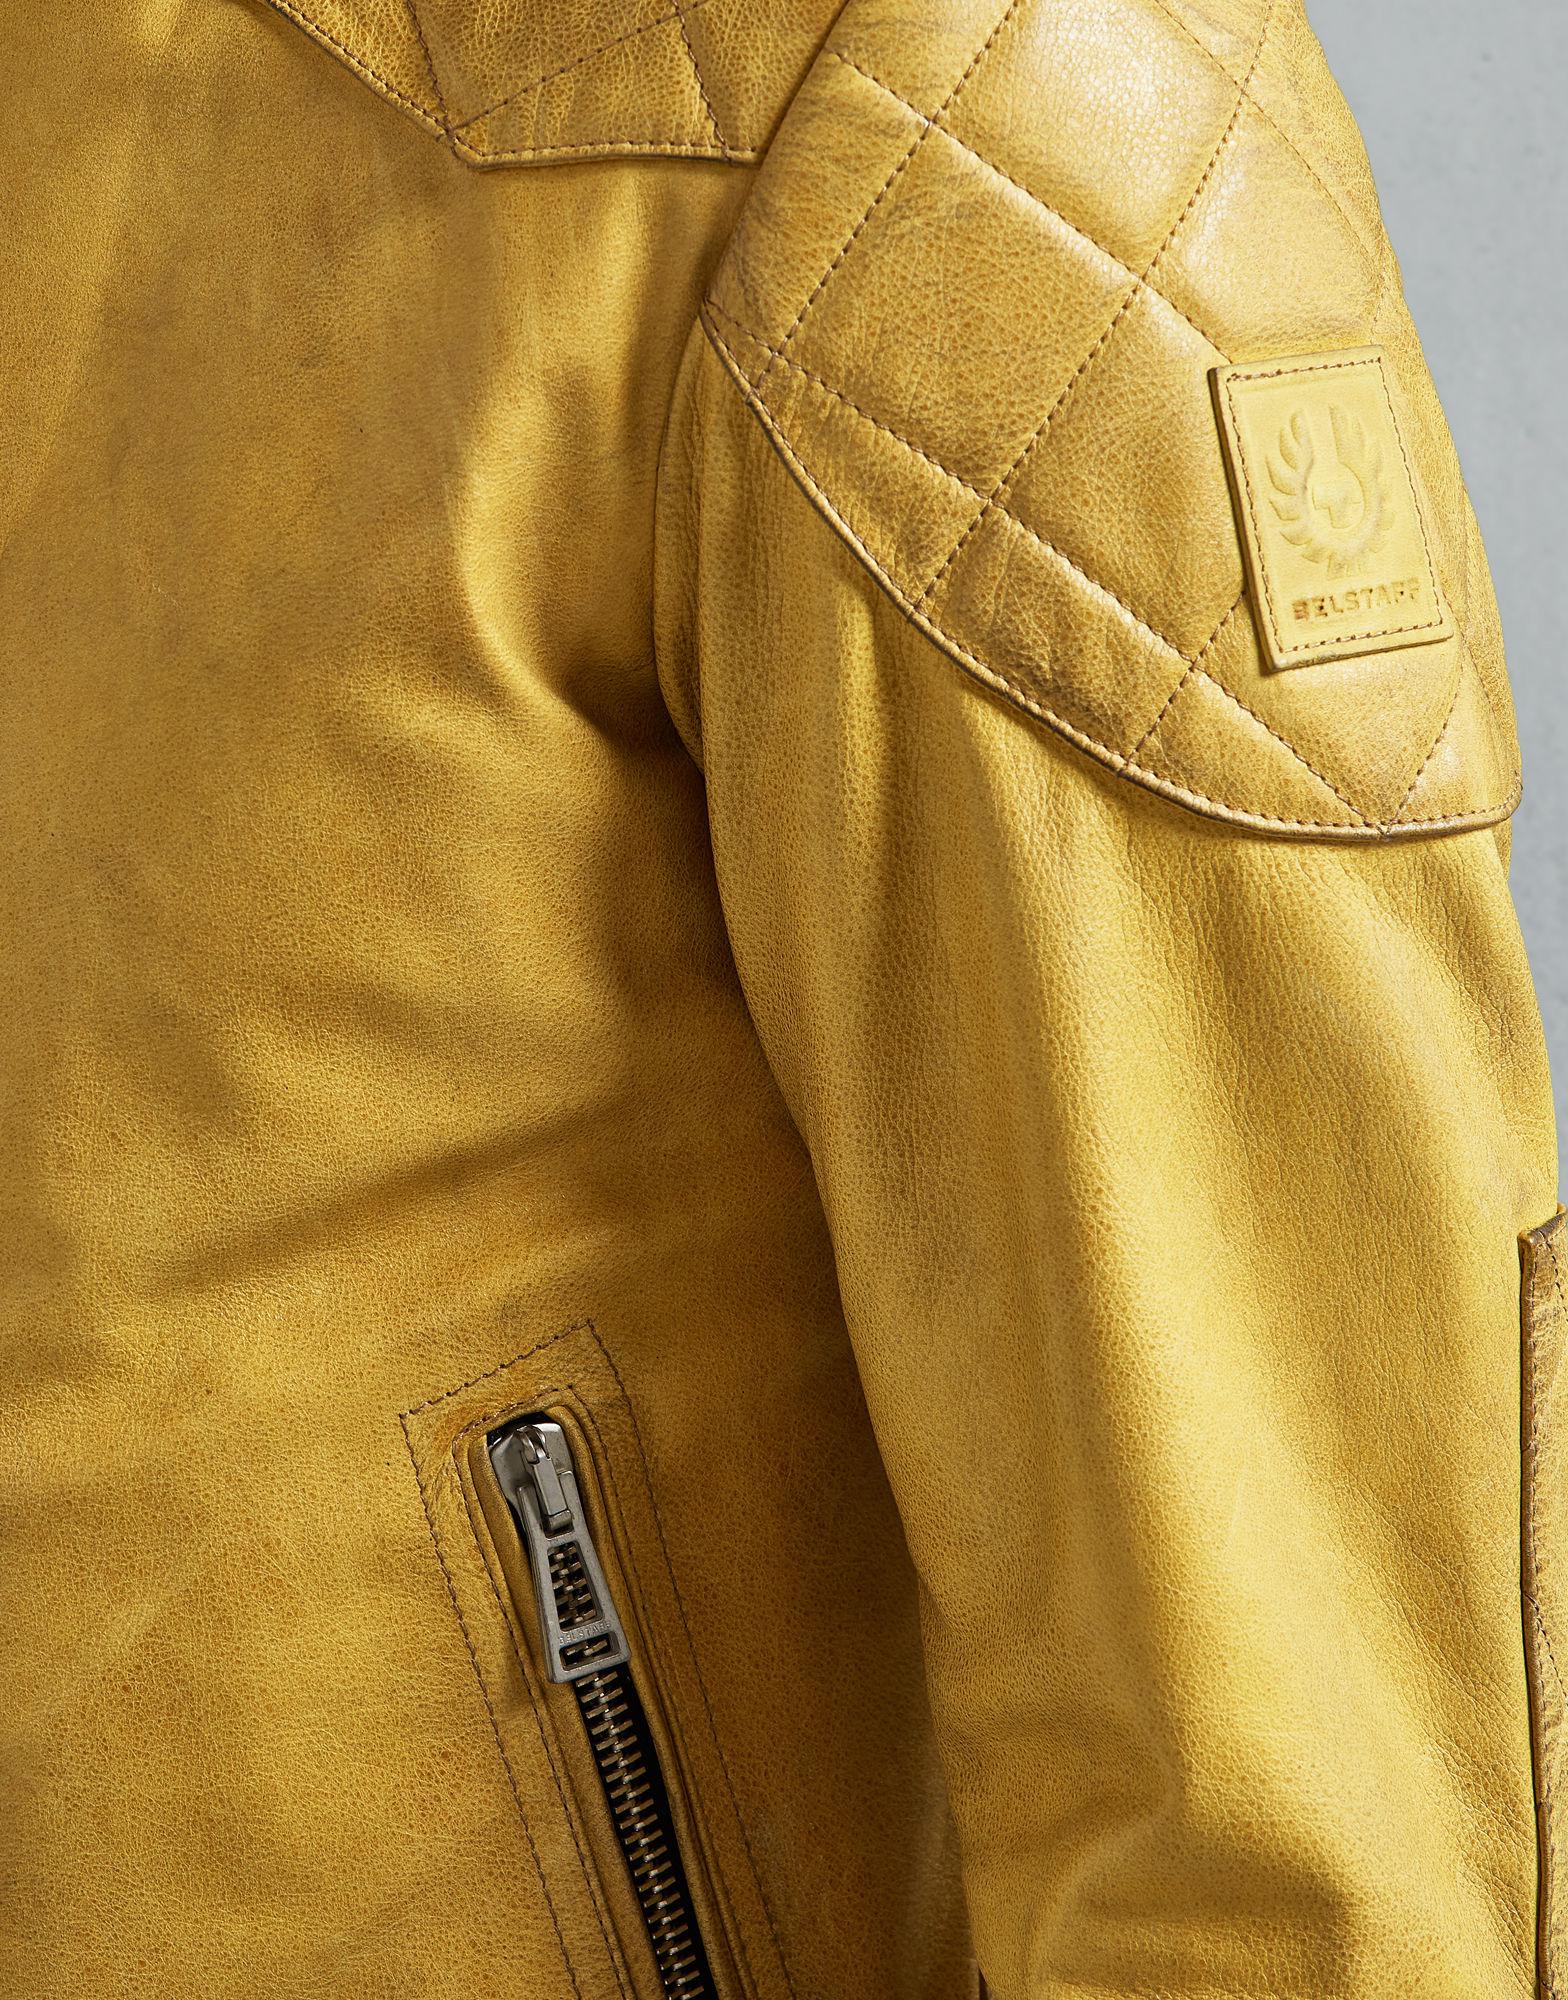 Belstaff Outlaw Leather Jacket in Yellow for Men - Lyst